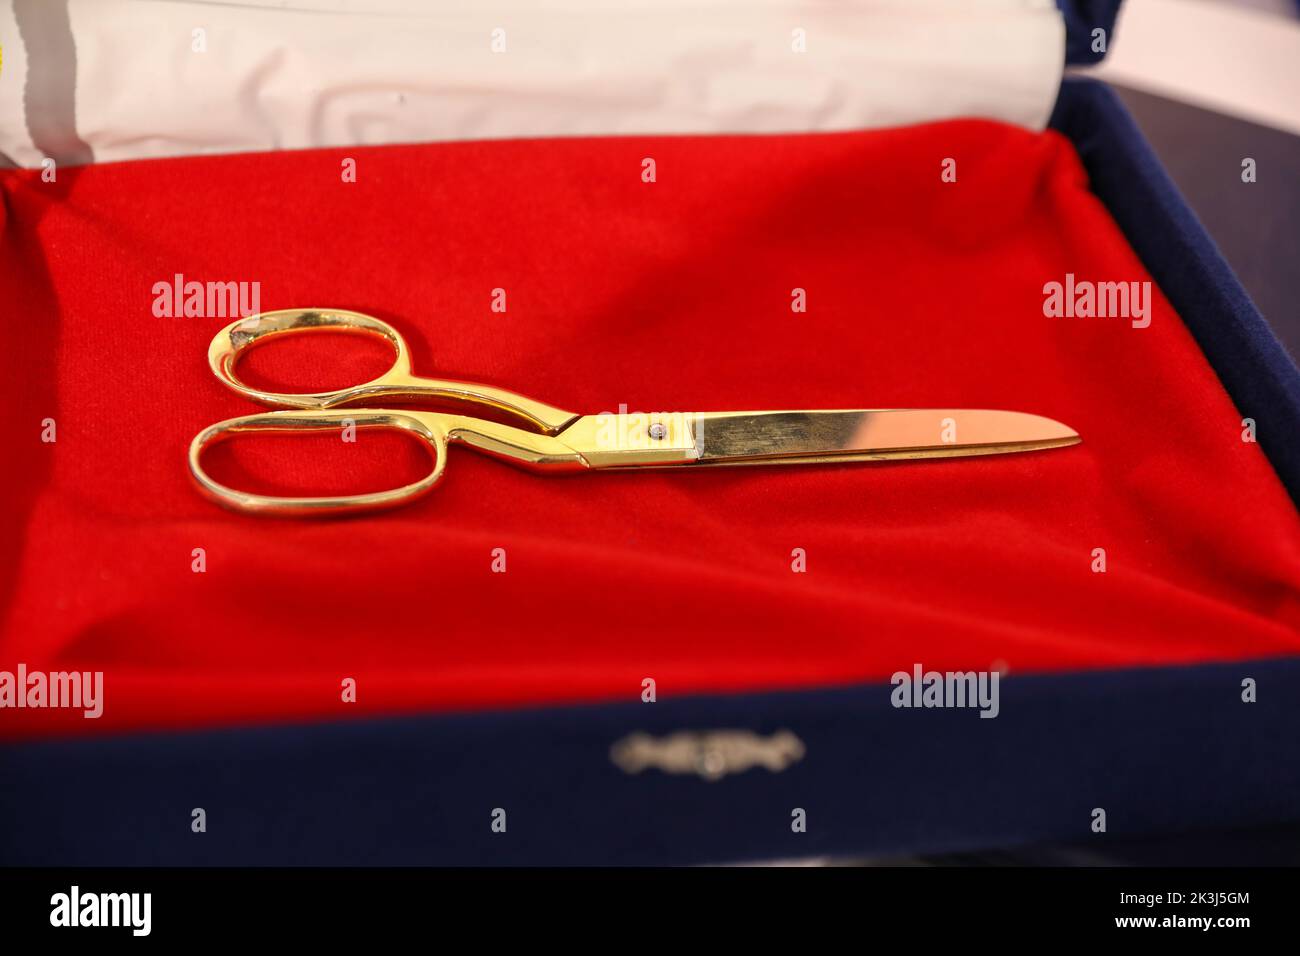 19 Scissors Superseded In Ribbon Cutting Stock Photos, High-Res